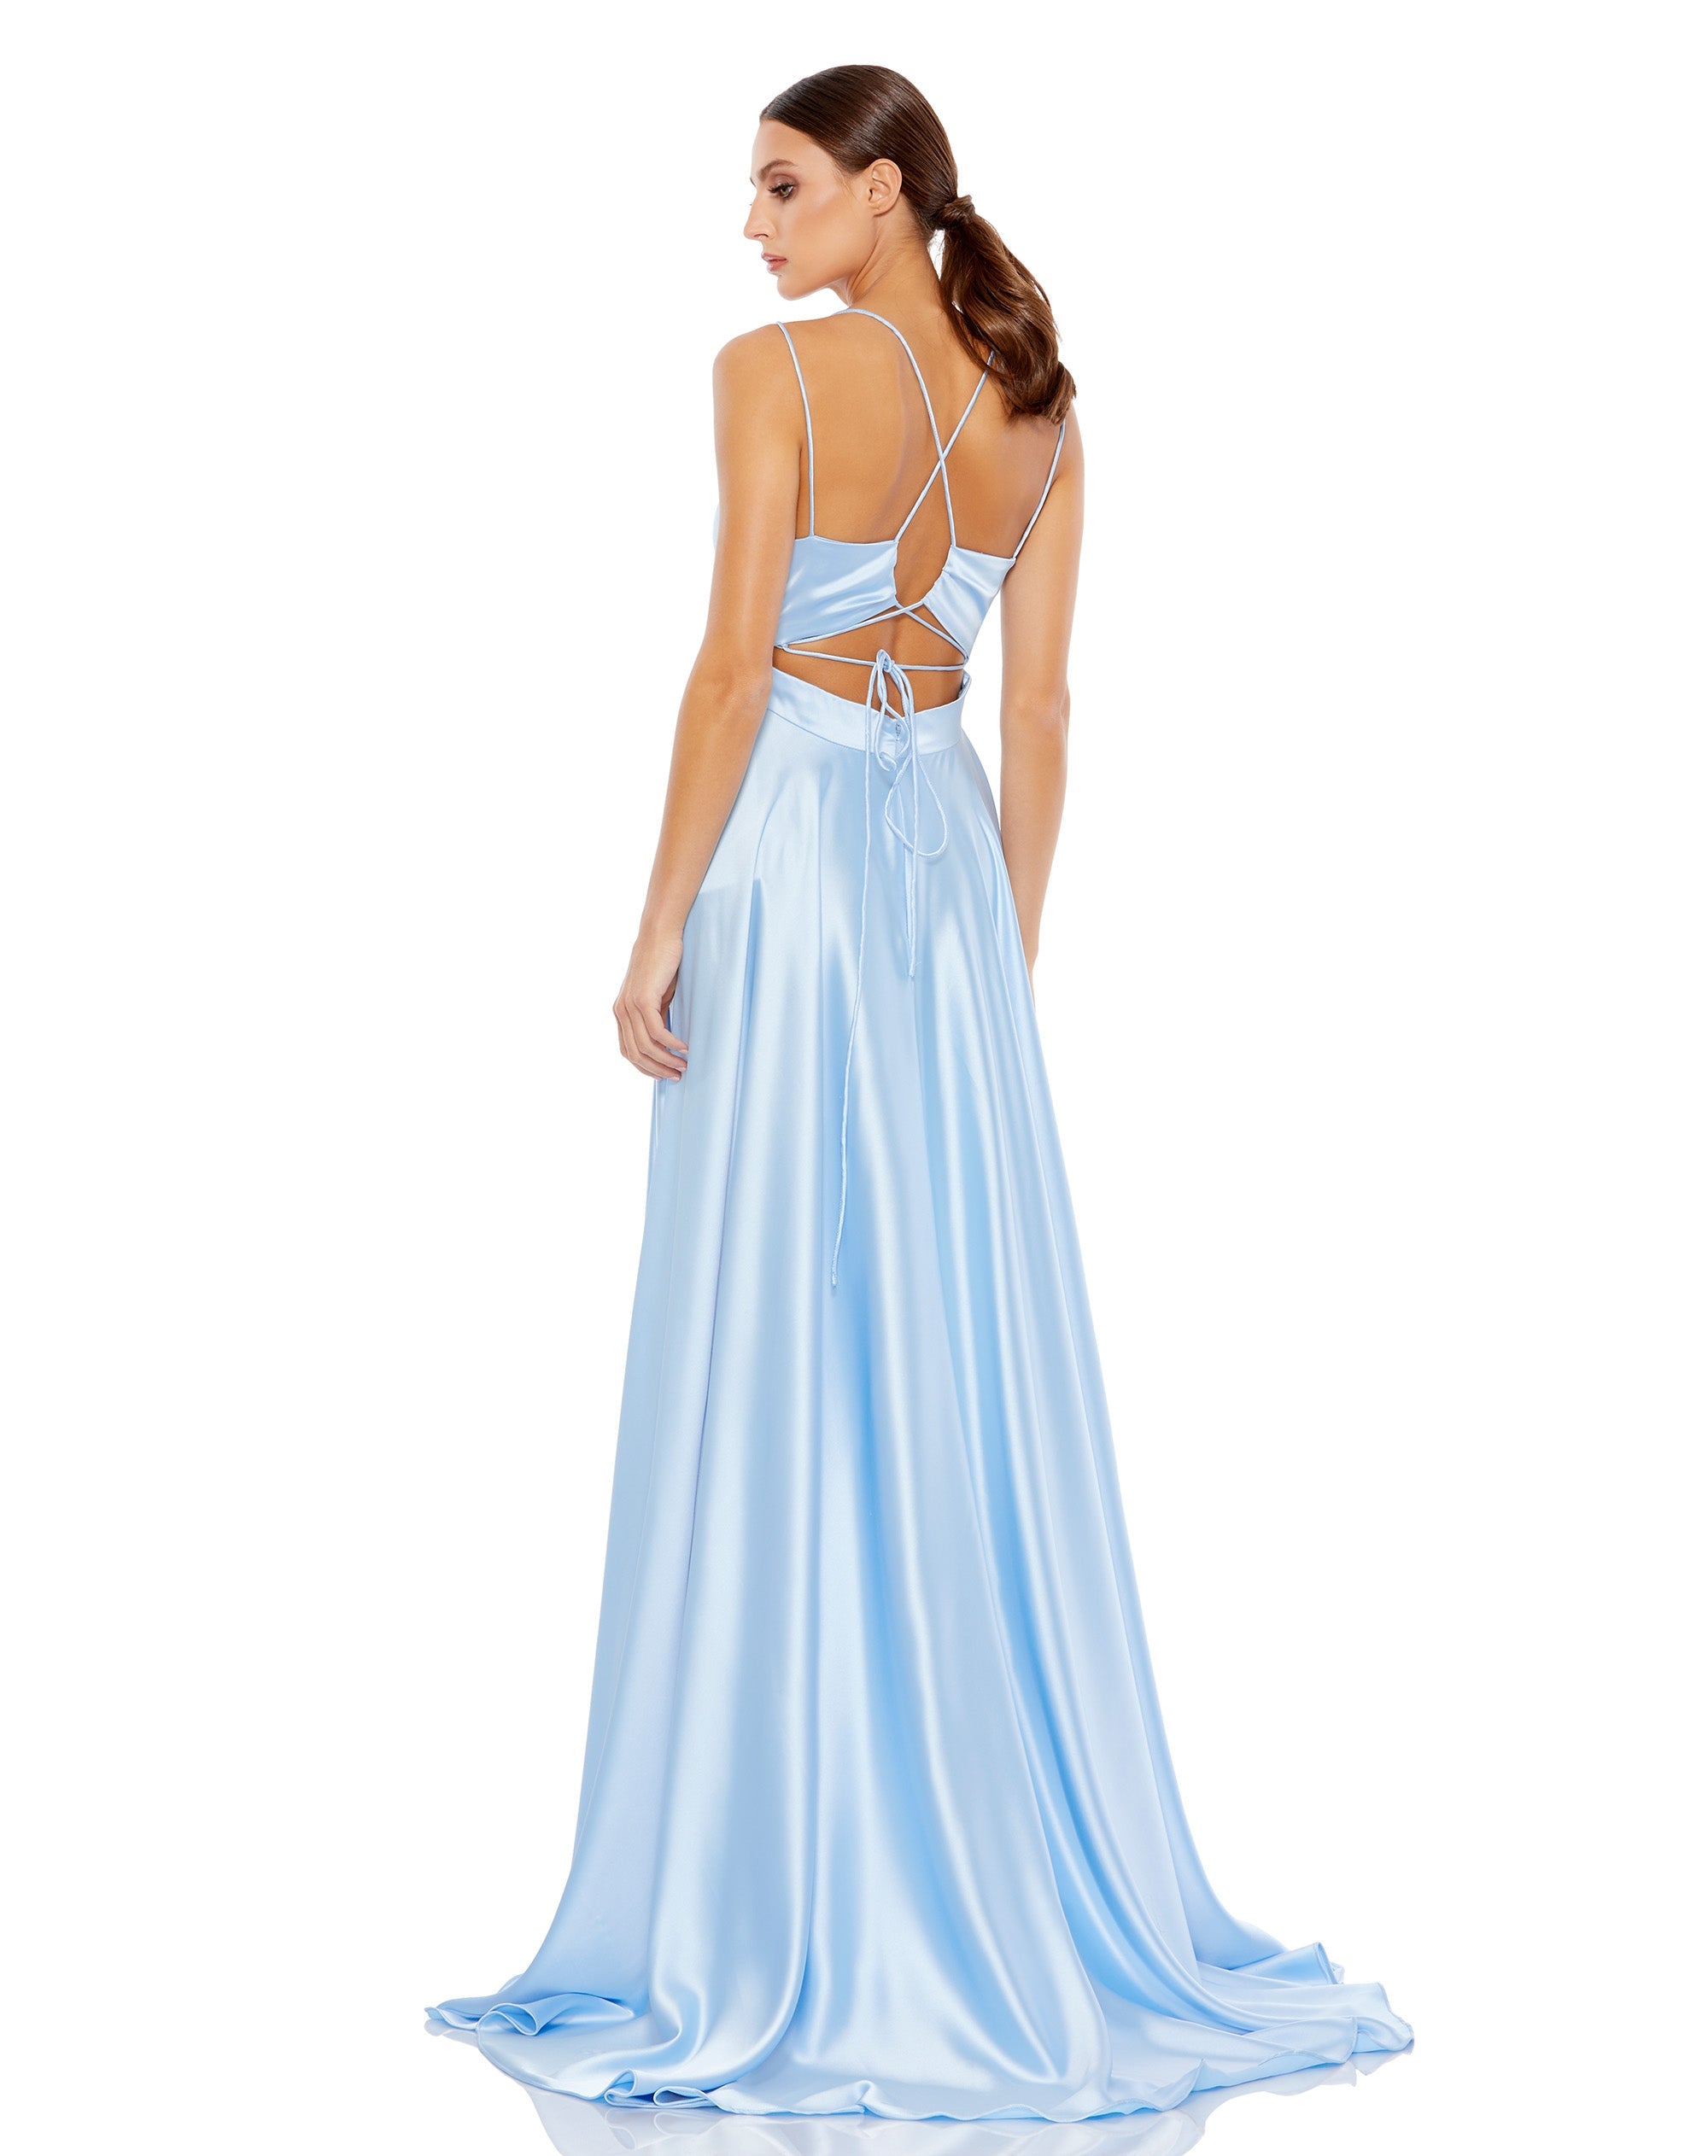 Satin Strappy-Back High Slit Gown - FINAL SALE